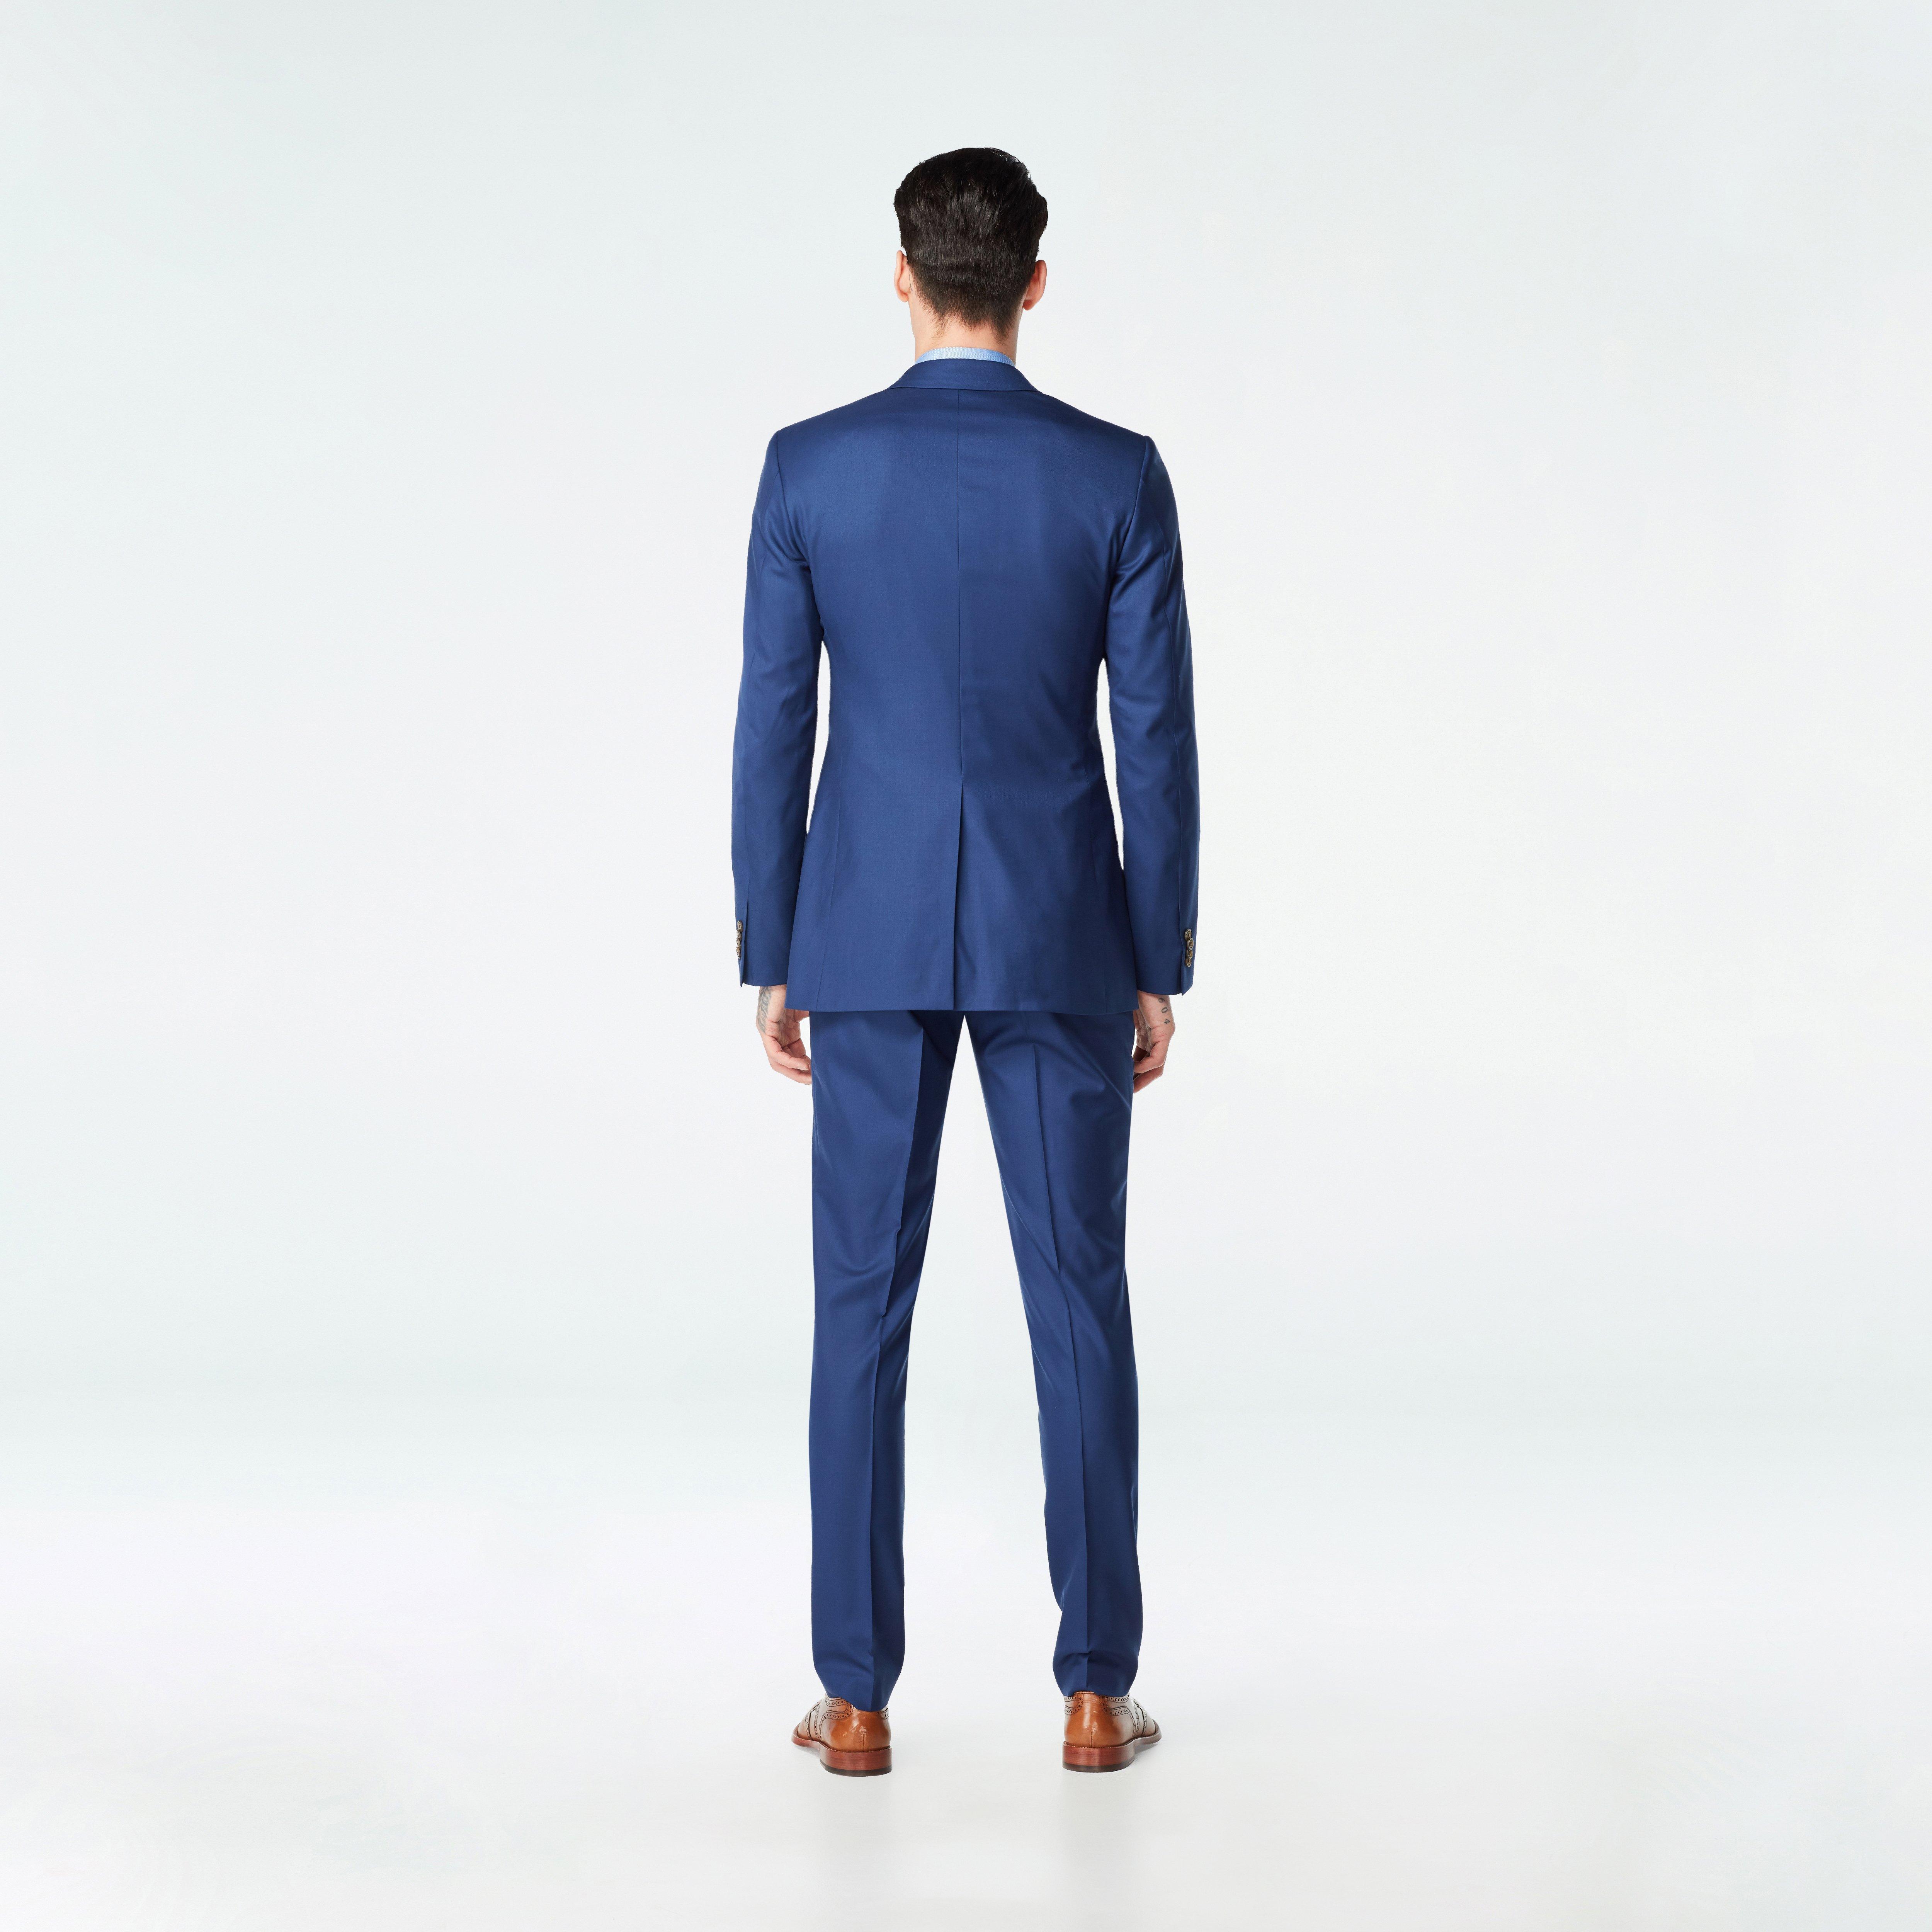 Custom Suits Made For You - Highbridge Blue Suit | INDOCHINO